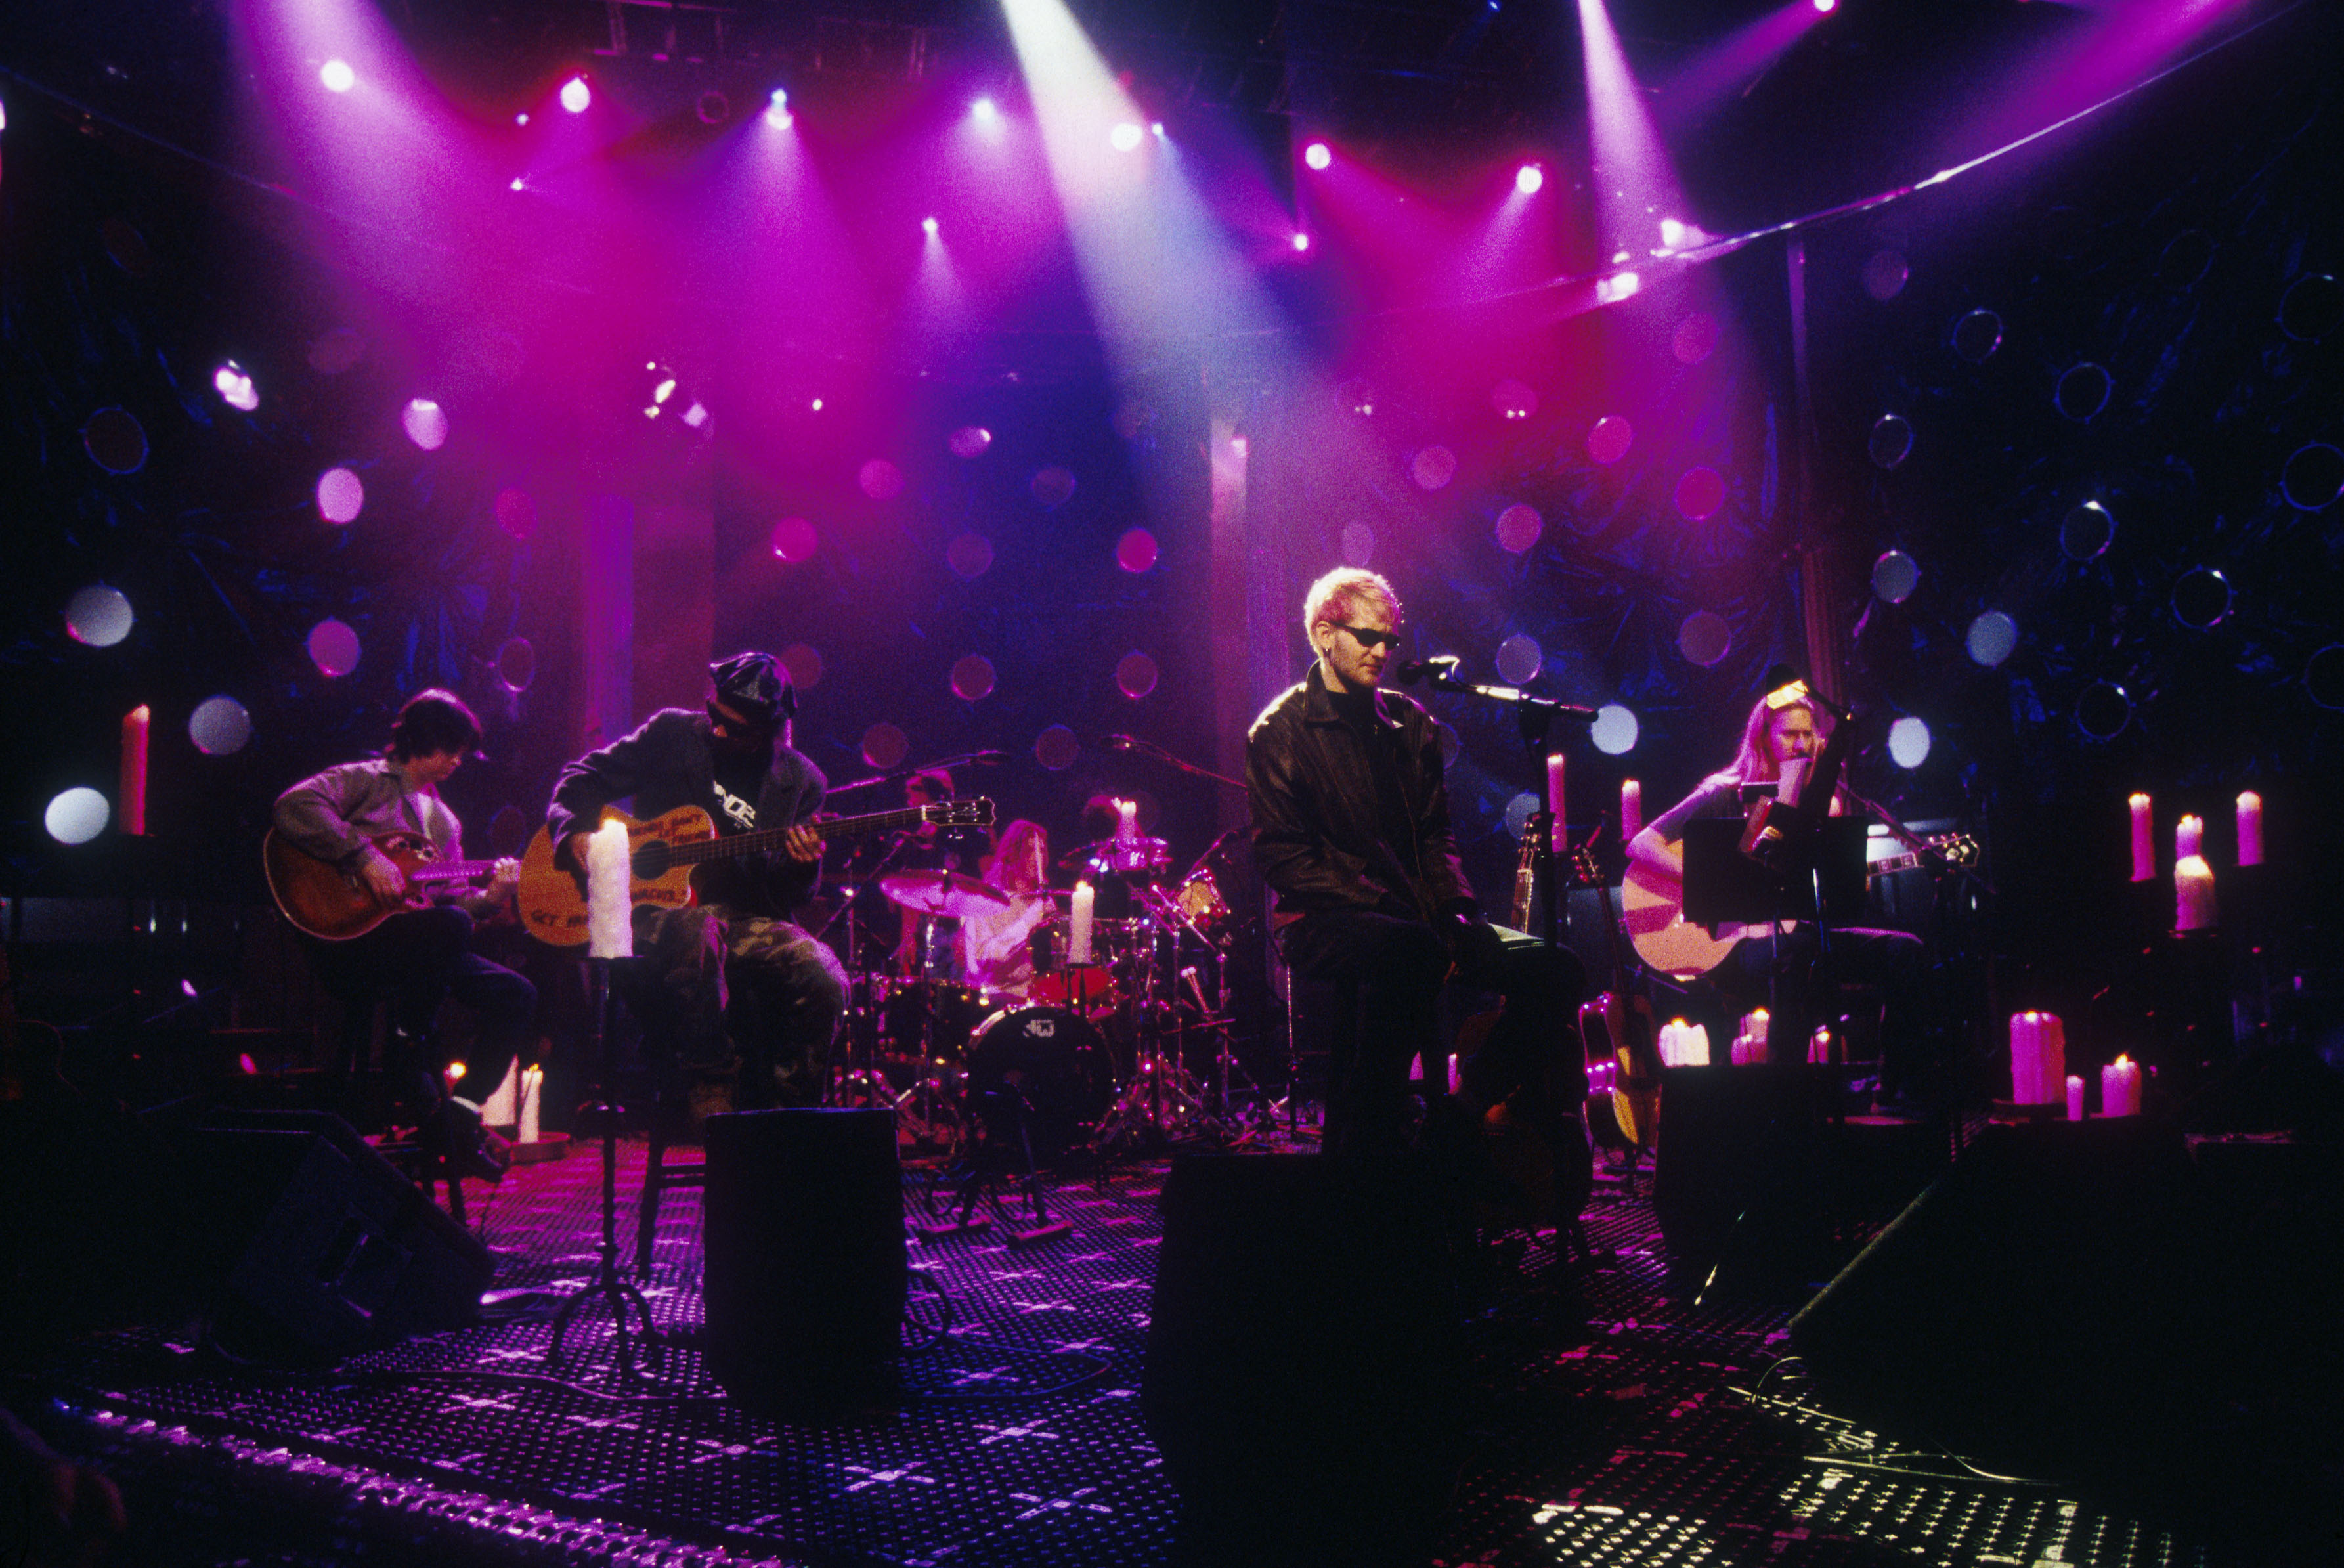 Layne Staley, lead singer of Alice In Chains performing on MTV Unplugged in 1996 Photo by Frank Micelotta/Getty Images